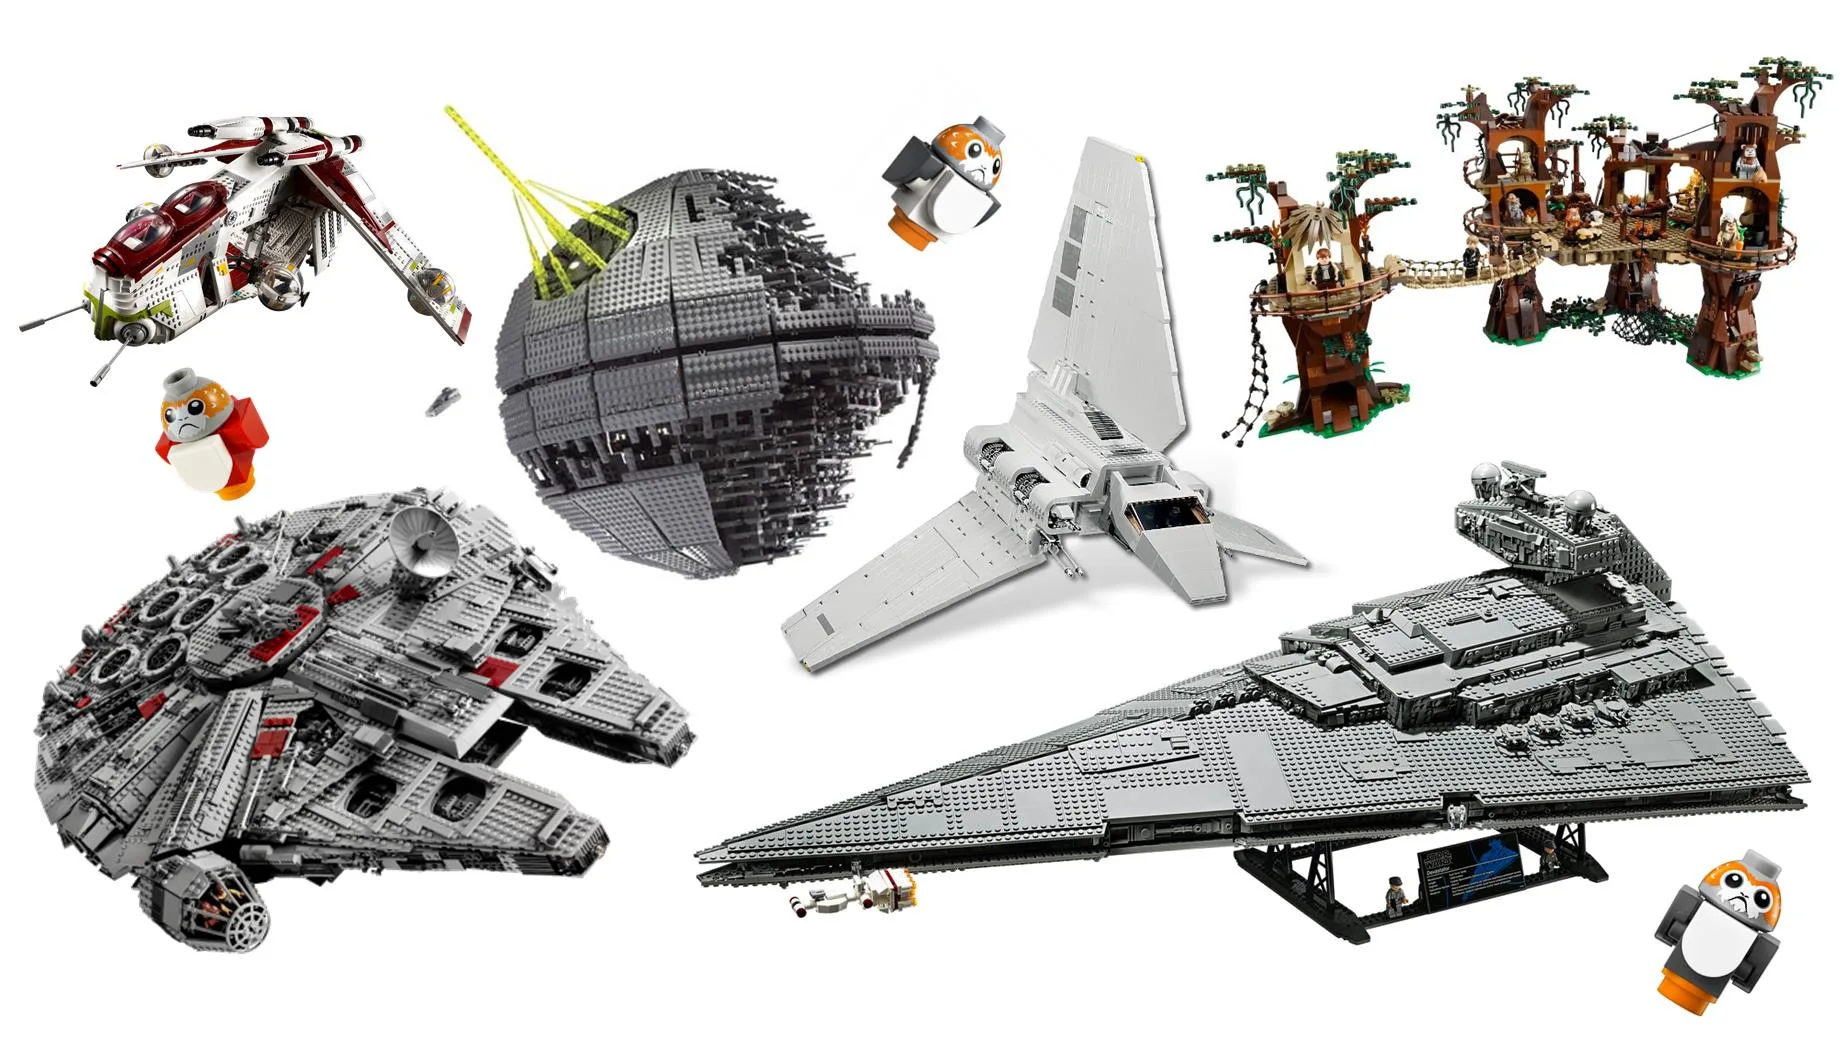 LEGO Star Wars largest sets - feature image